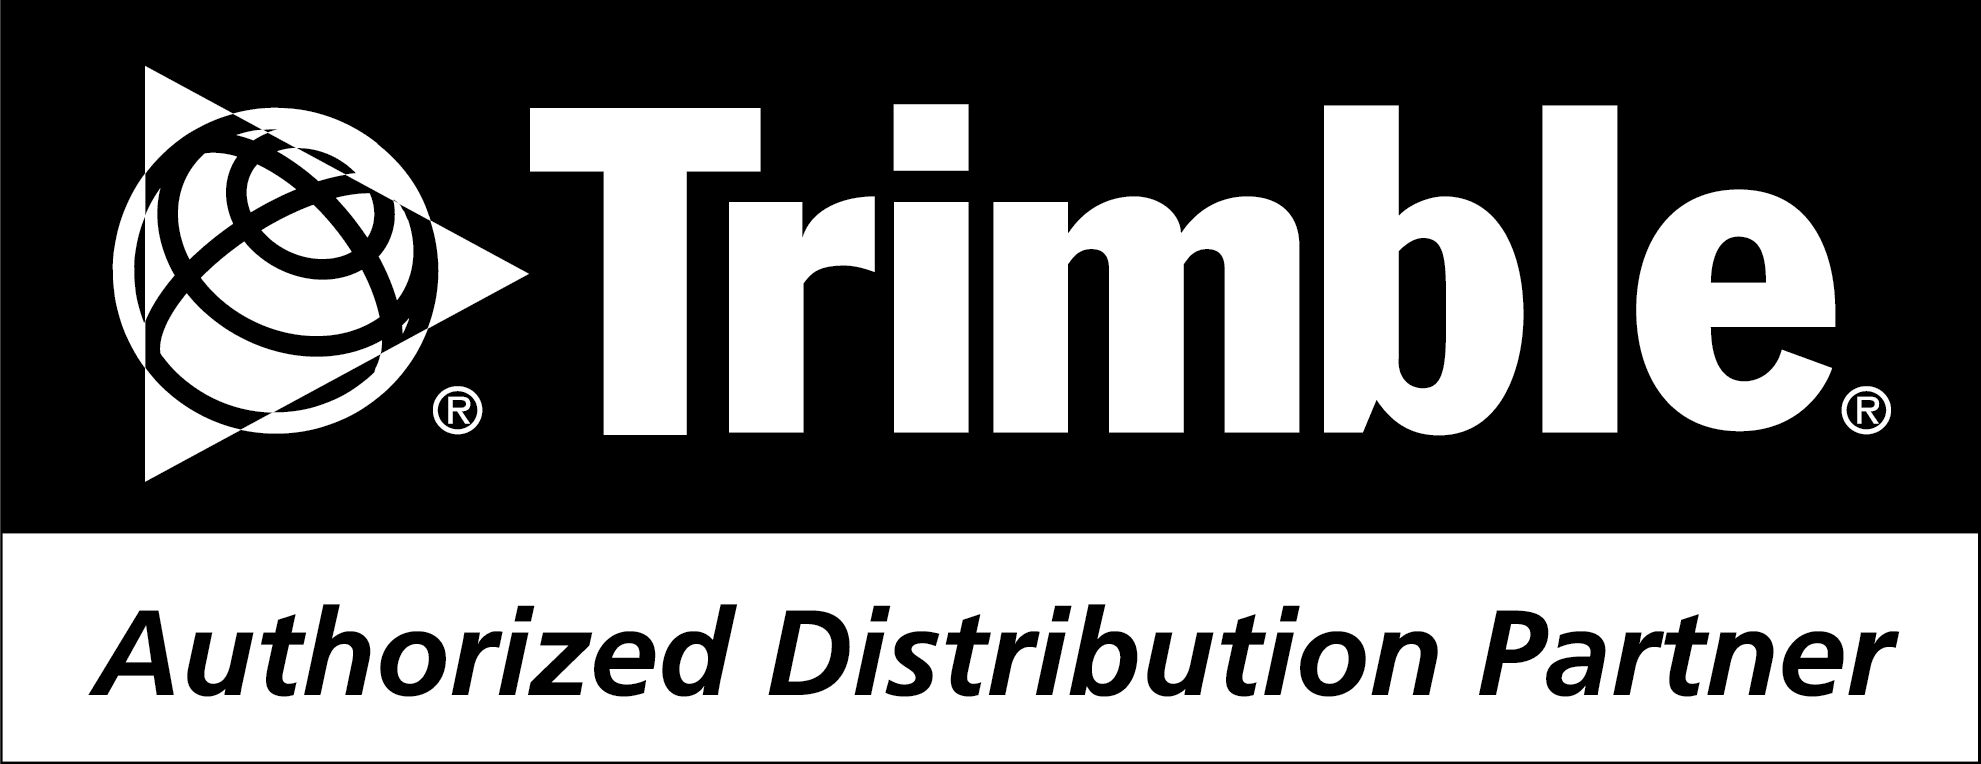 Trimble Logo - Land Surveying Equipment, GPS/GNSS Receivers, Mapping & GIS Software